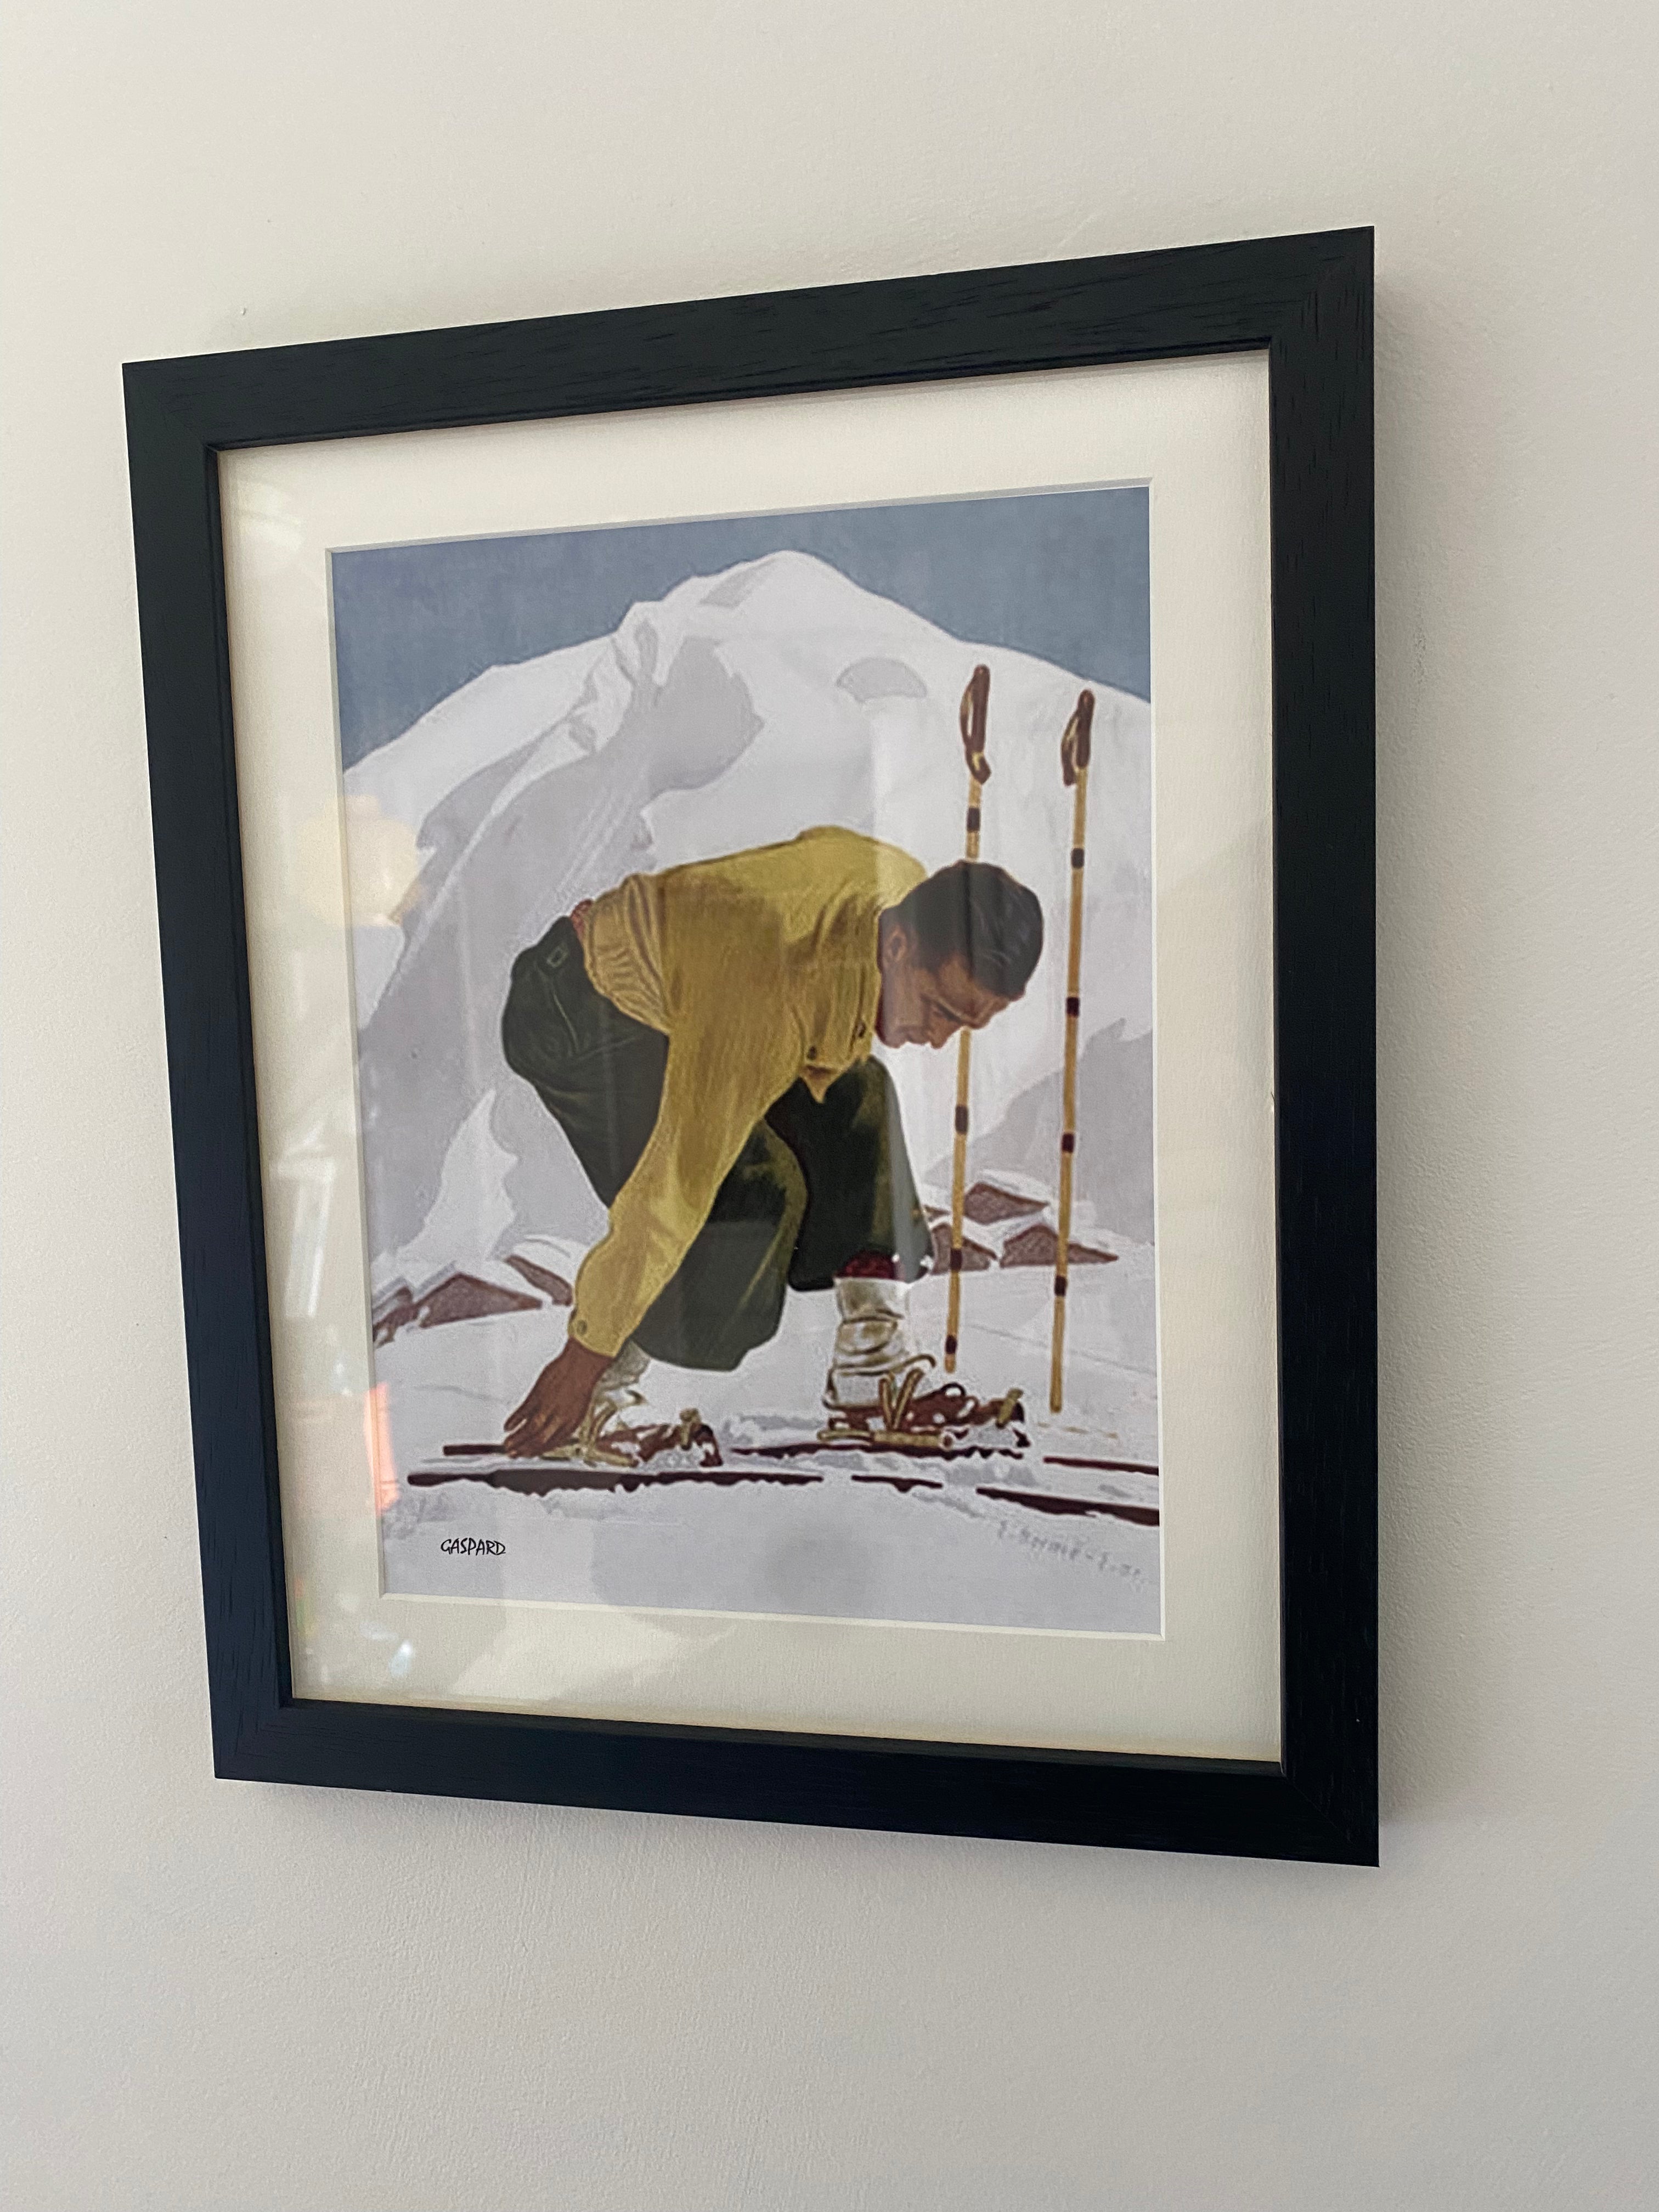 Black framed picture of a man in a yellow jumper & green ski pants leaning down to click into his wooden skis, with a white mountain & blue sky in the background, hanging on a white wall.